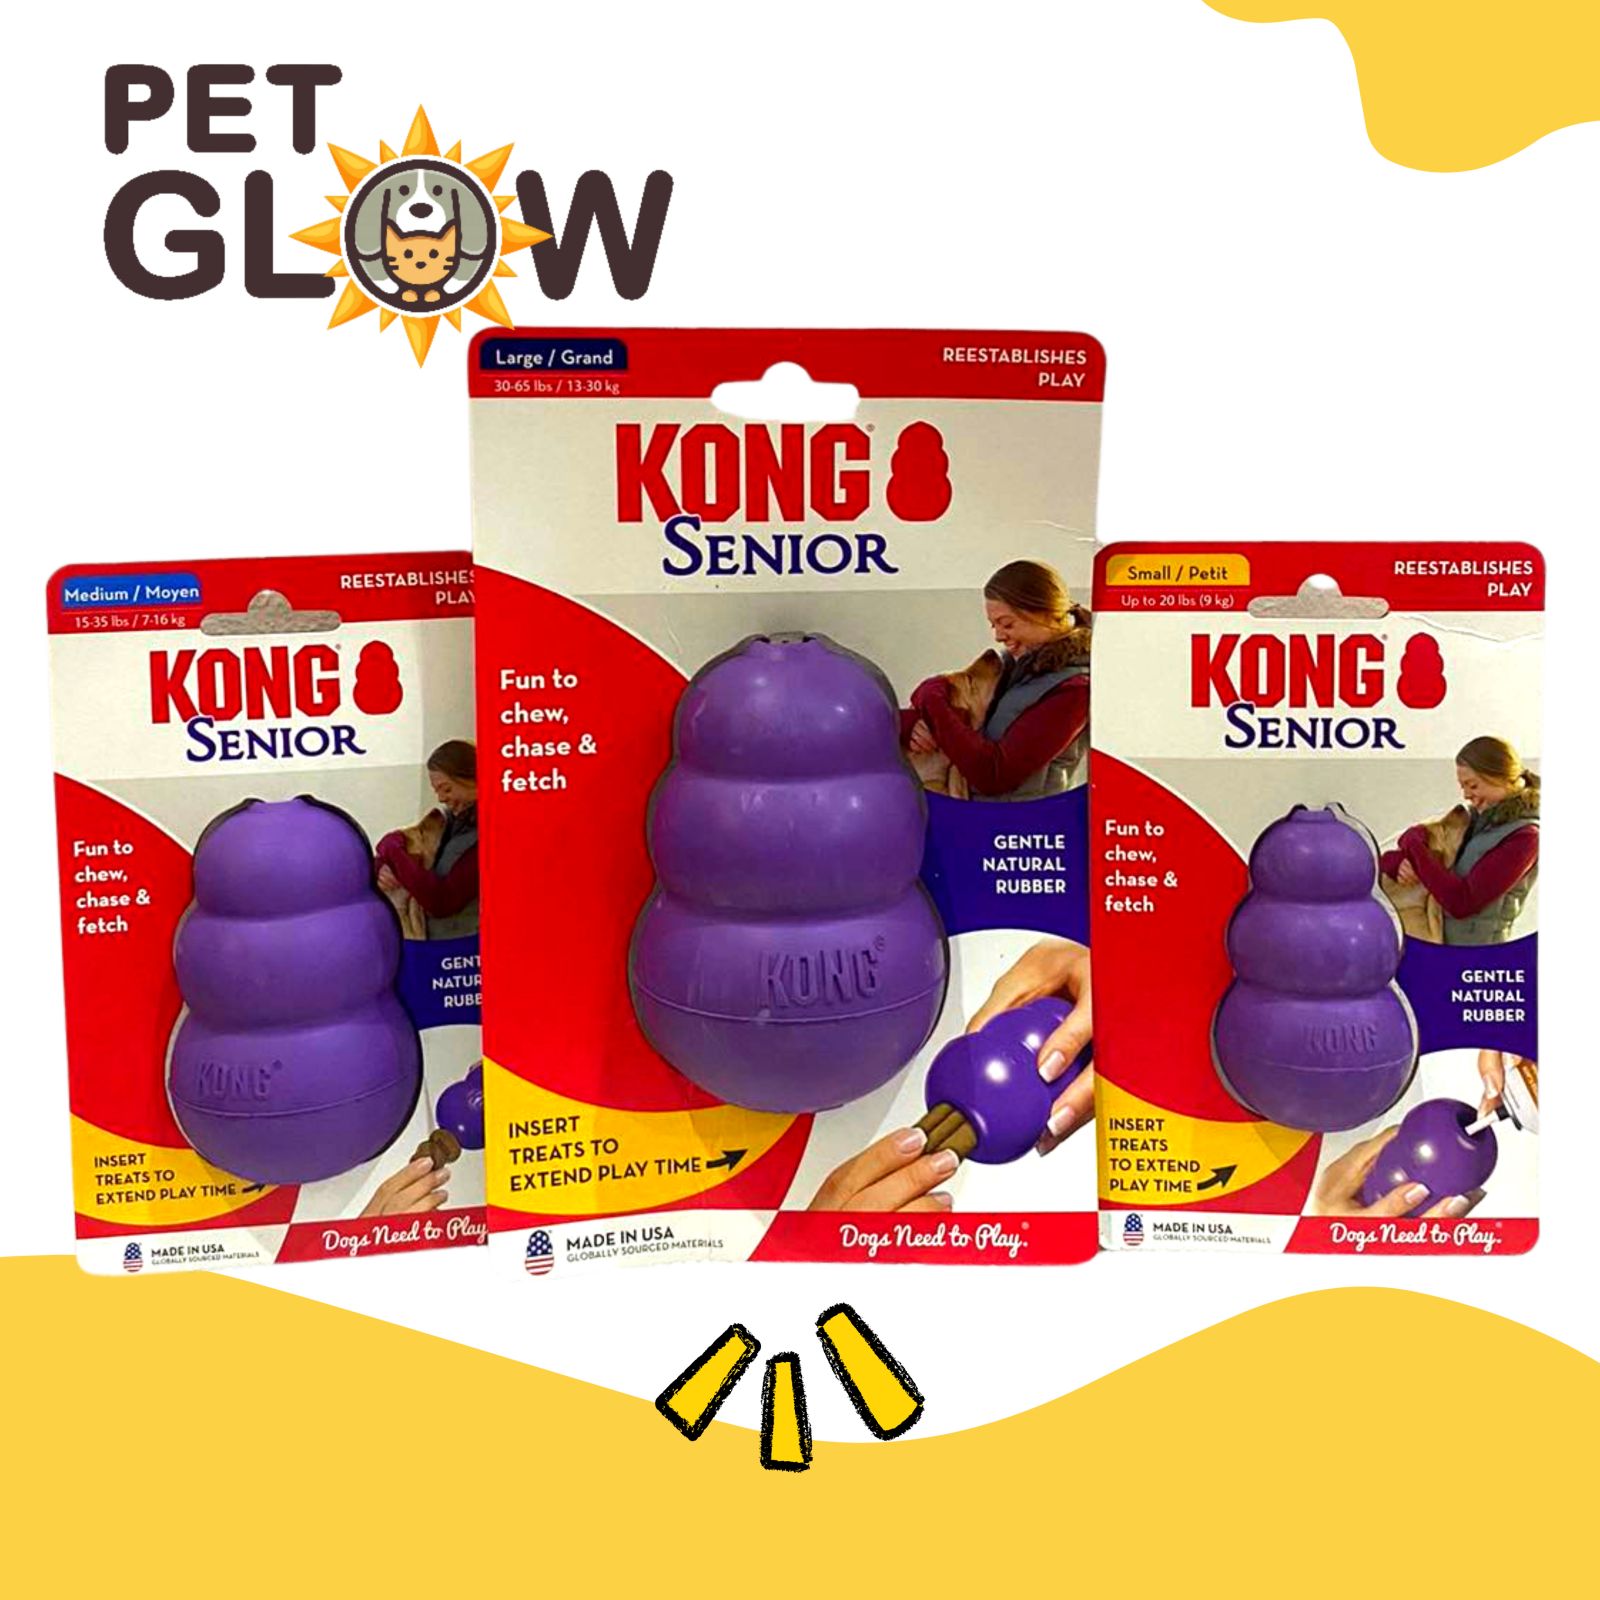 KONG Senior Gentle Natural Rubber Dog Toy, Small, Purple 